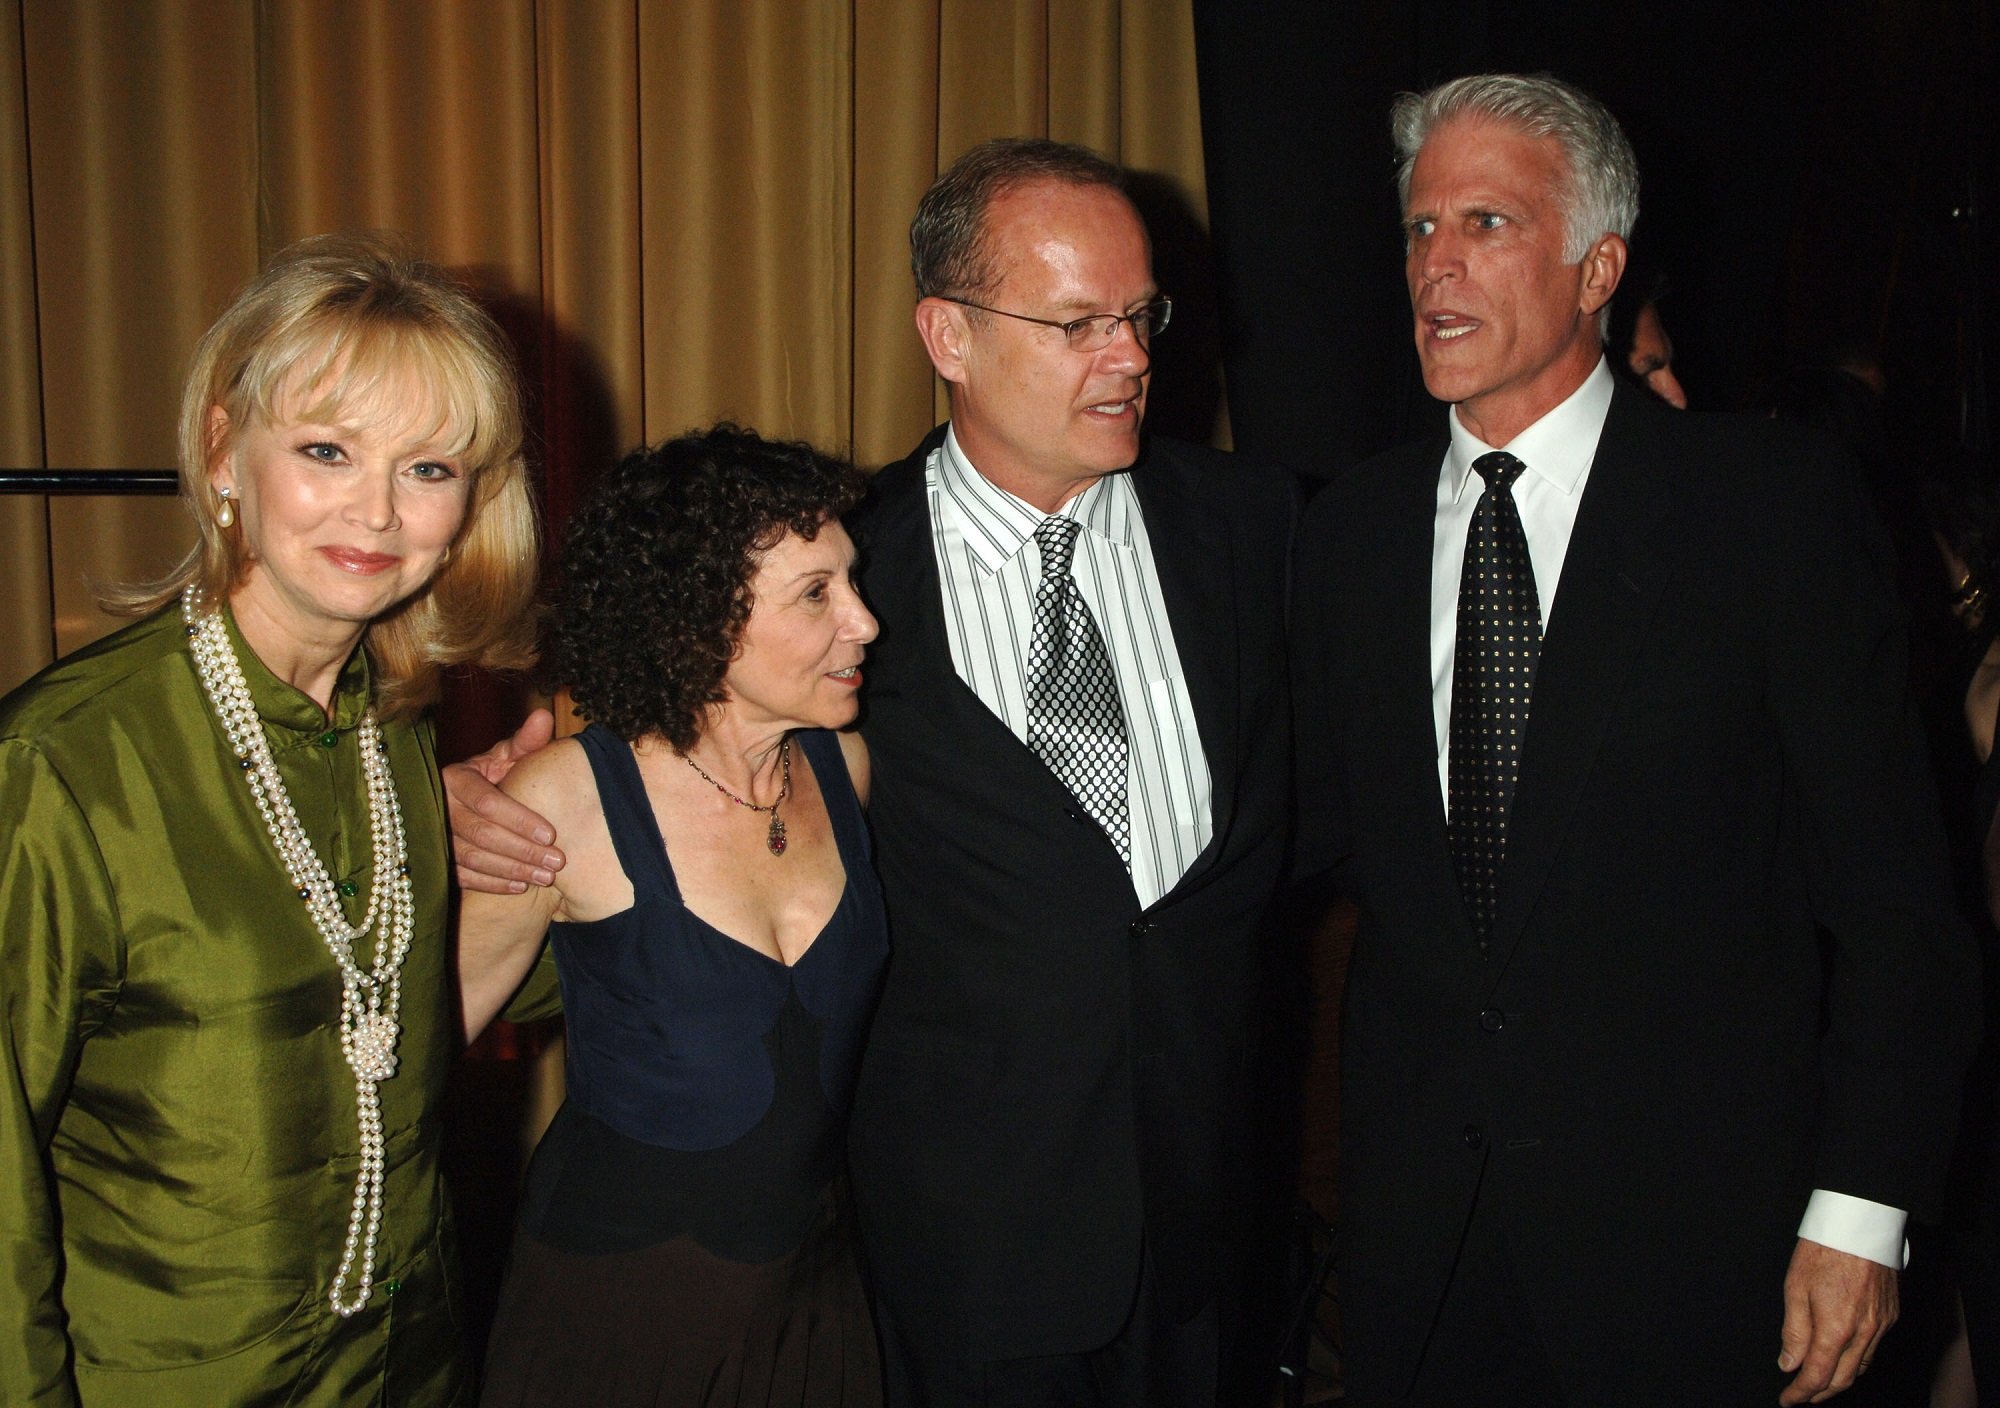 Shelley Long, Rhea Perlman, Kelsey Grammer. and Ted Danson of Cheers